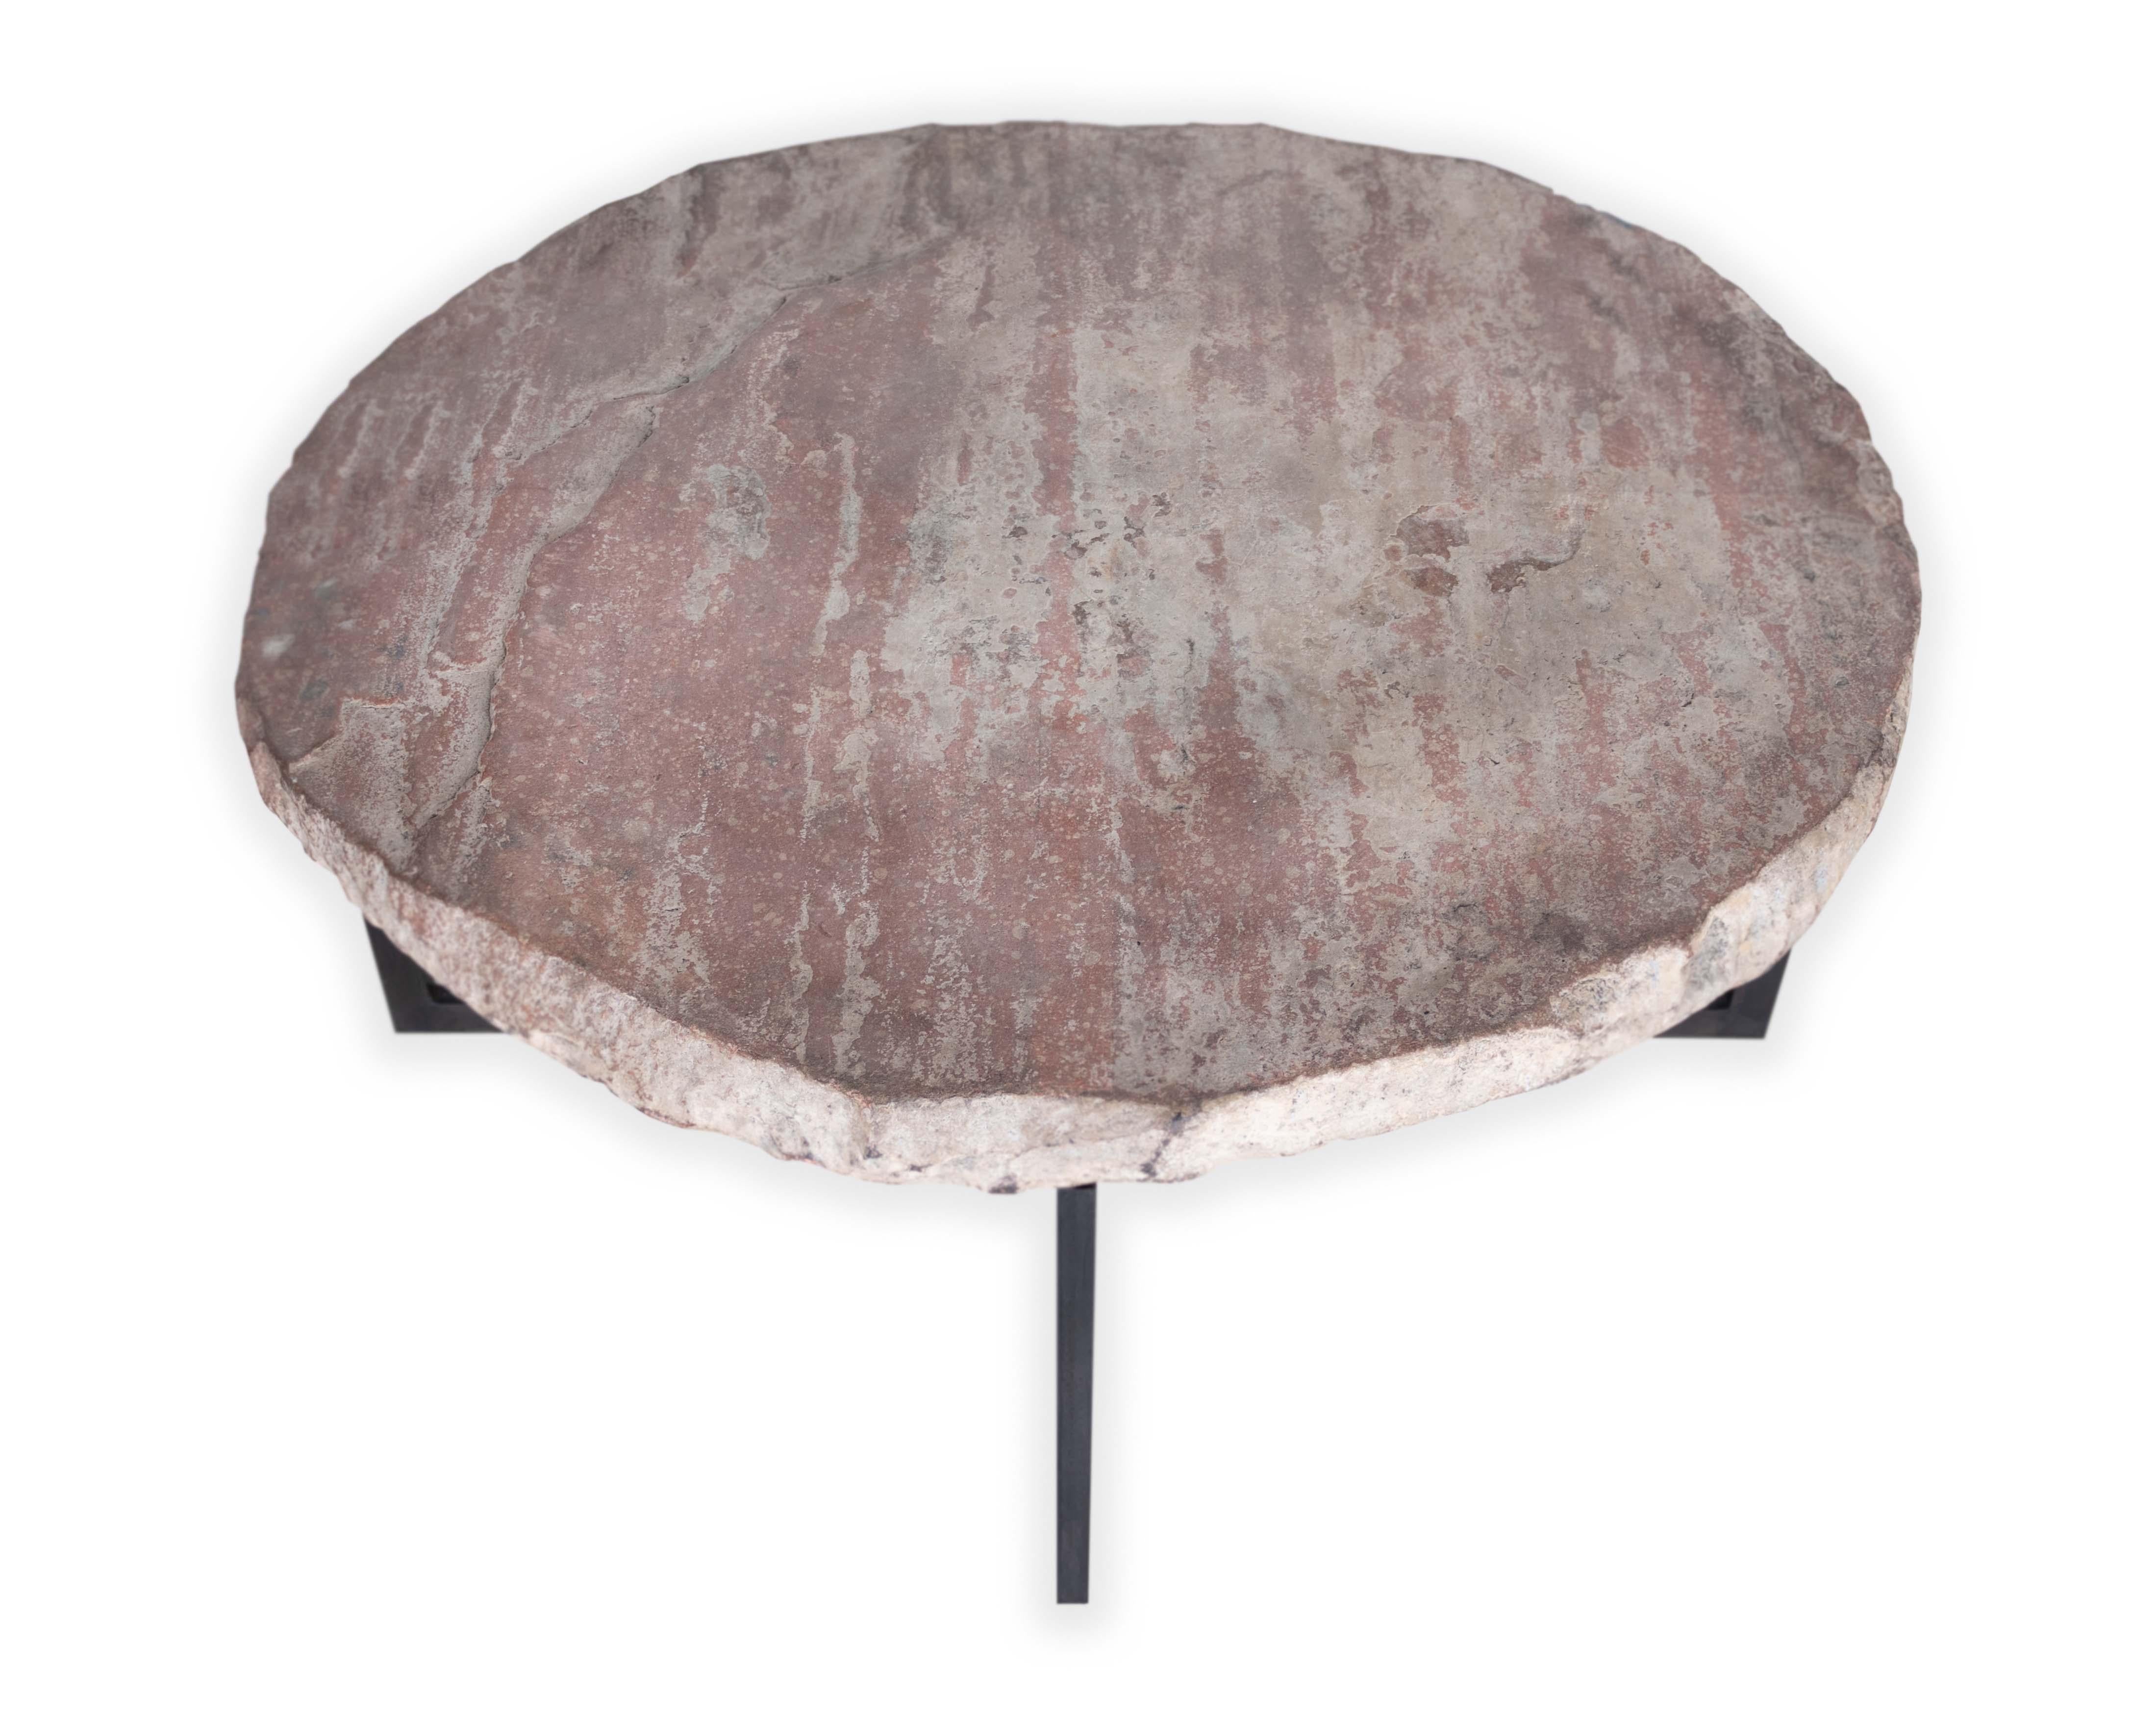 Architectural stone element on steel base coffee table. 

This piece is a part of Brendan Bass’s one-of-a-kind collection, Le Monde. French for “The World”, the Le Monde collection is made up of rare and hard to find pieces curated by Brendan from